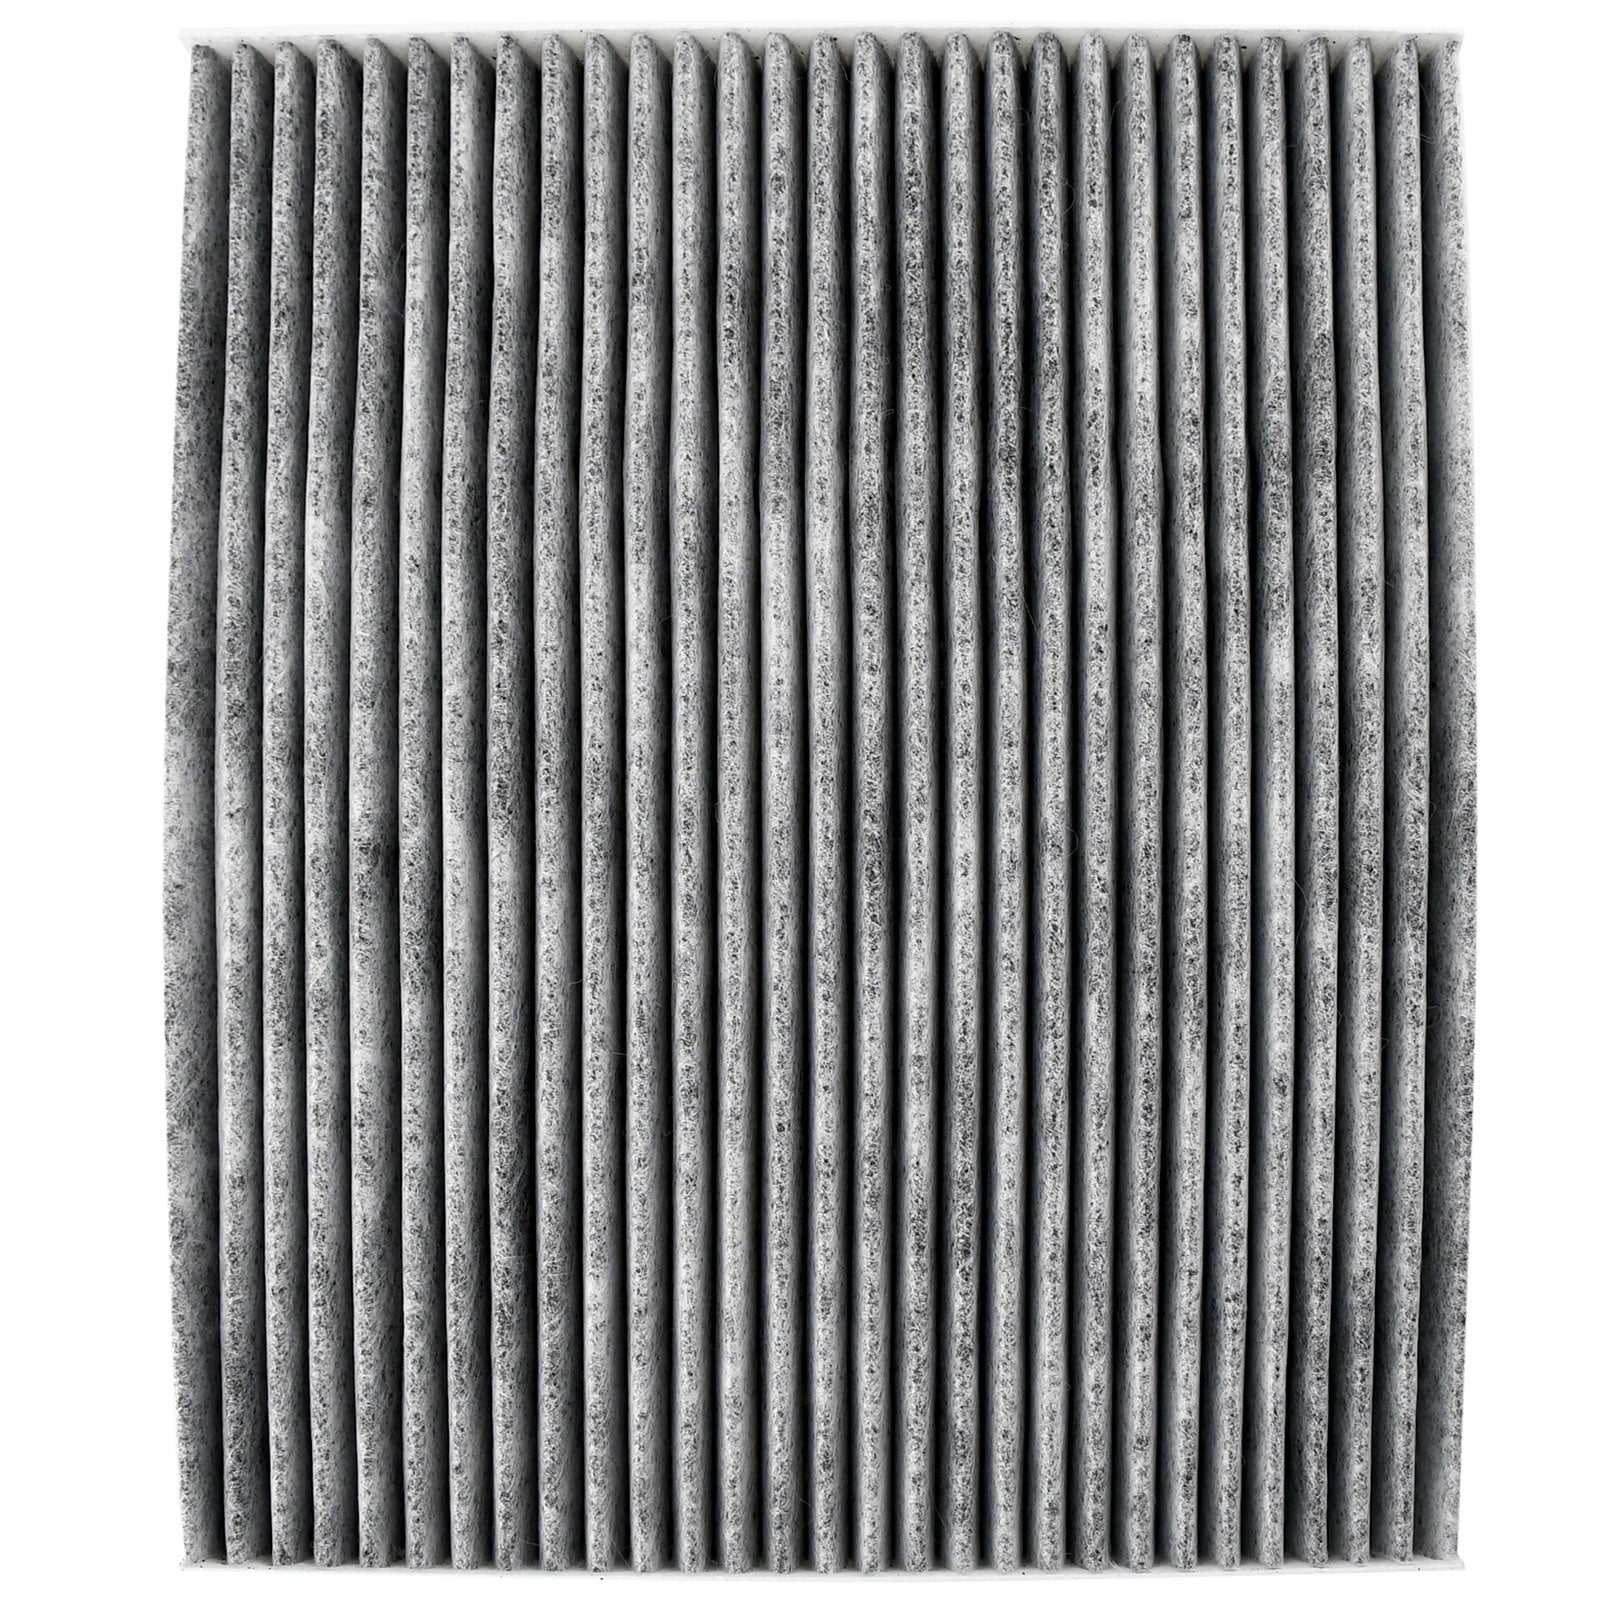 MotorbyMotor C272773JC1A (CF11776) Cabin Air Filter for Nissan Altima Pathfinder Murano, Infiniti JX35 QX60 Premium Air Filter, 244mm x 282mm x 20mm Car Air Filter MotorbyMotor